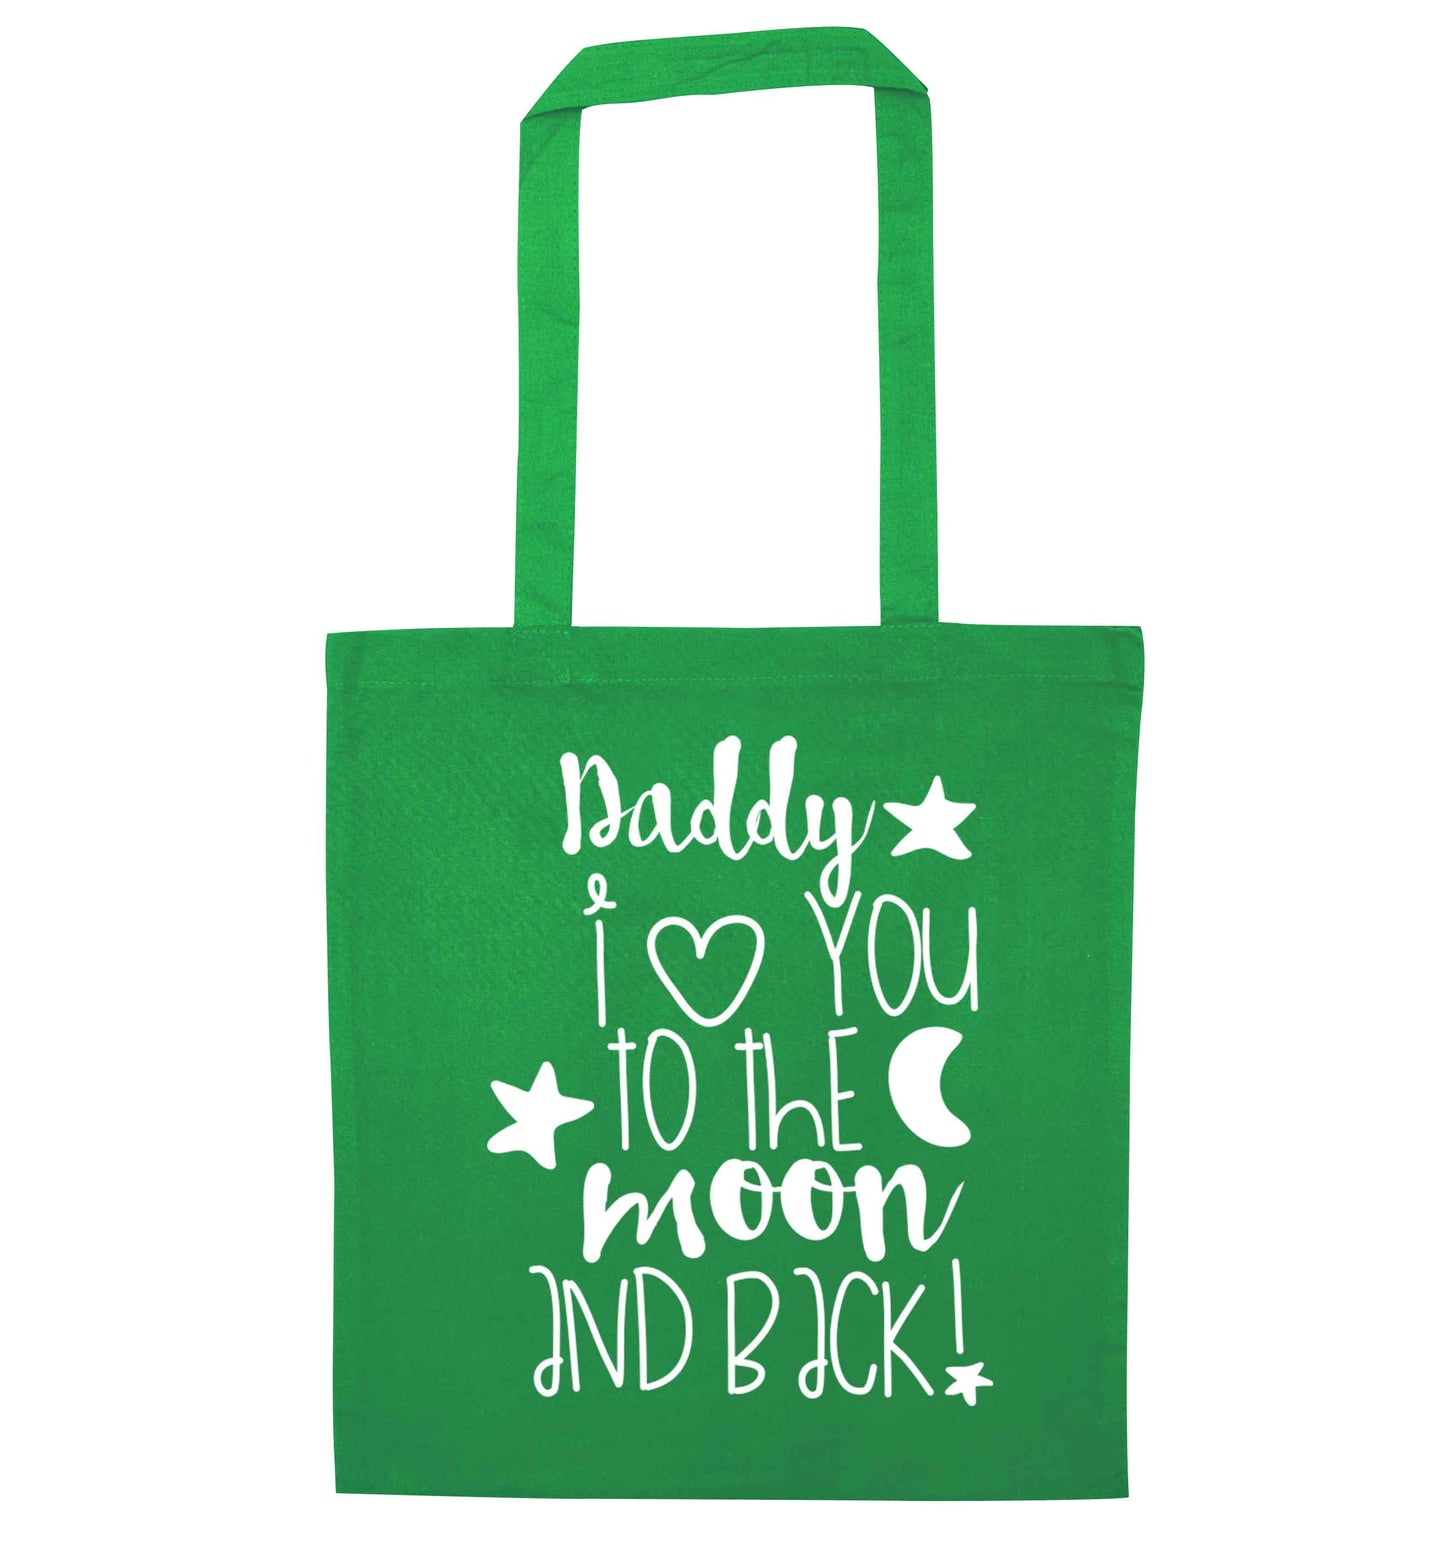 Daddy I love you to the moon and back green tote bag